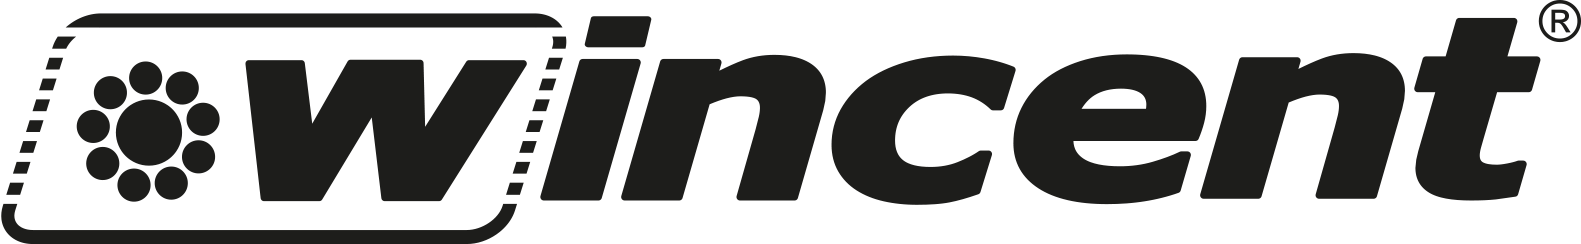 Wincent-logotype-black-with-R-2018 (1)